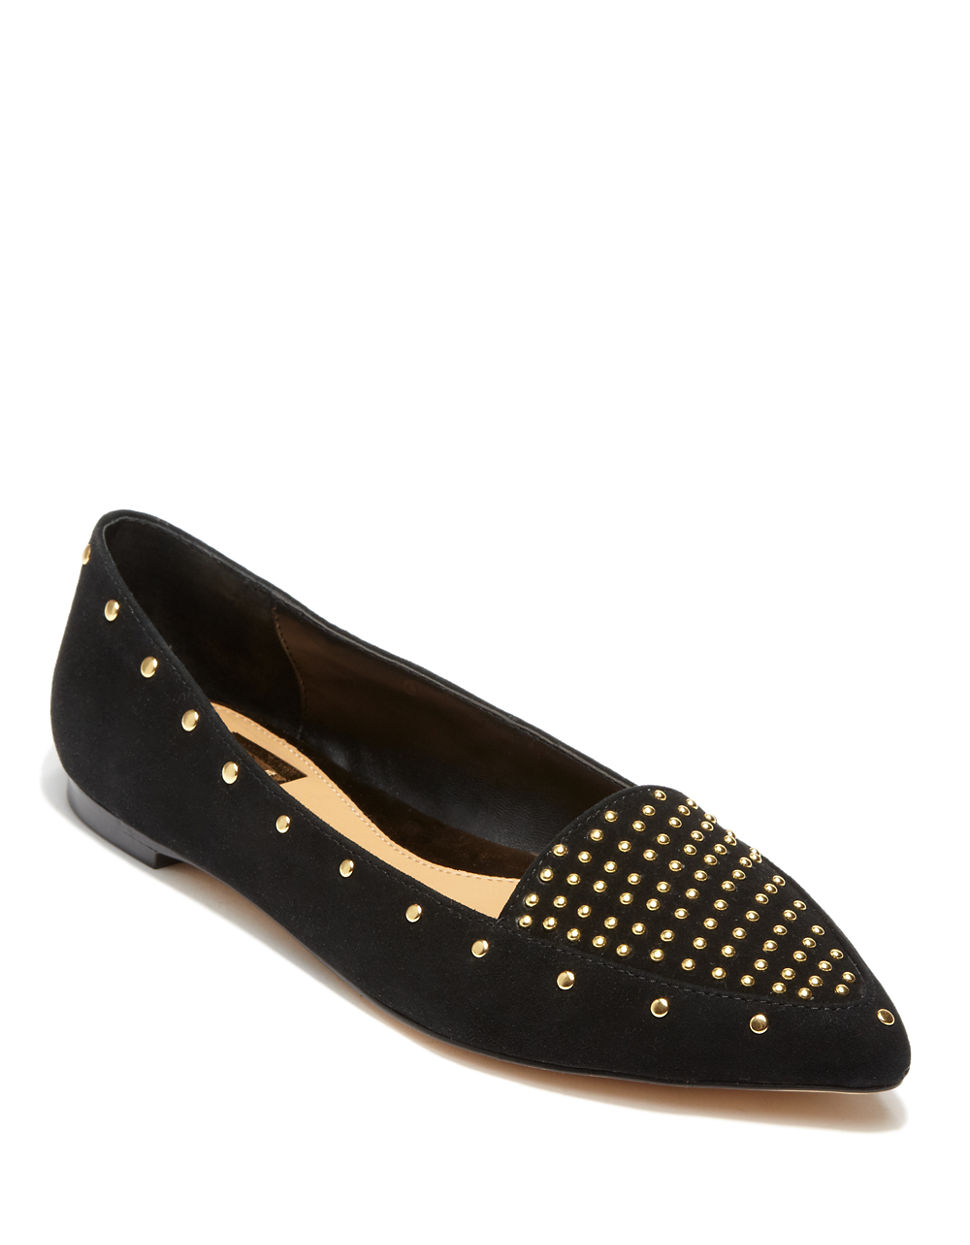 Dv By Dolce Vita Leena Studded Suede Flats in Black | Lyst